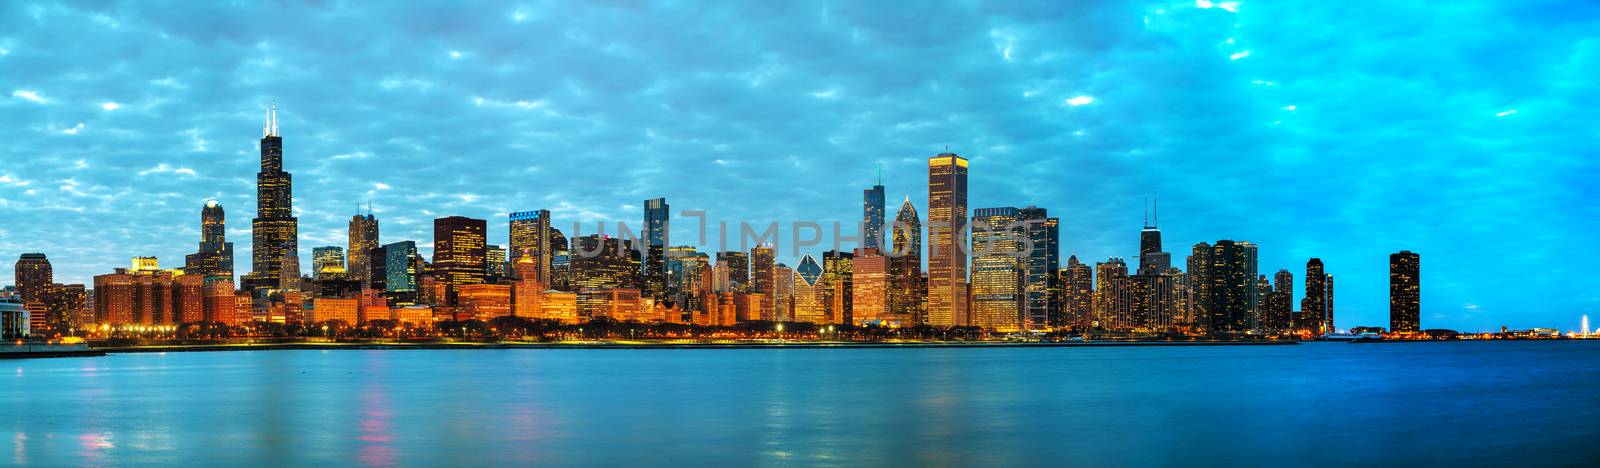 Chicago downtown cityscape panorama in the night